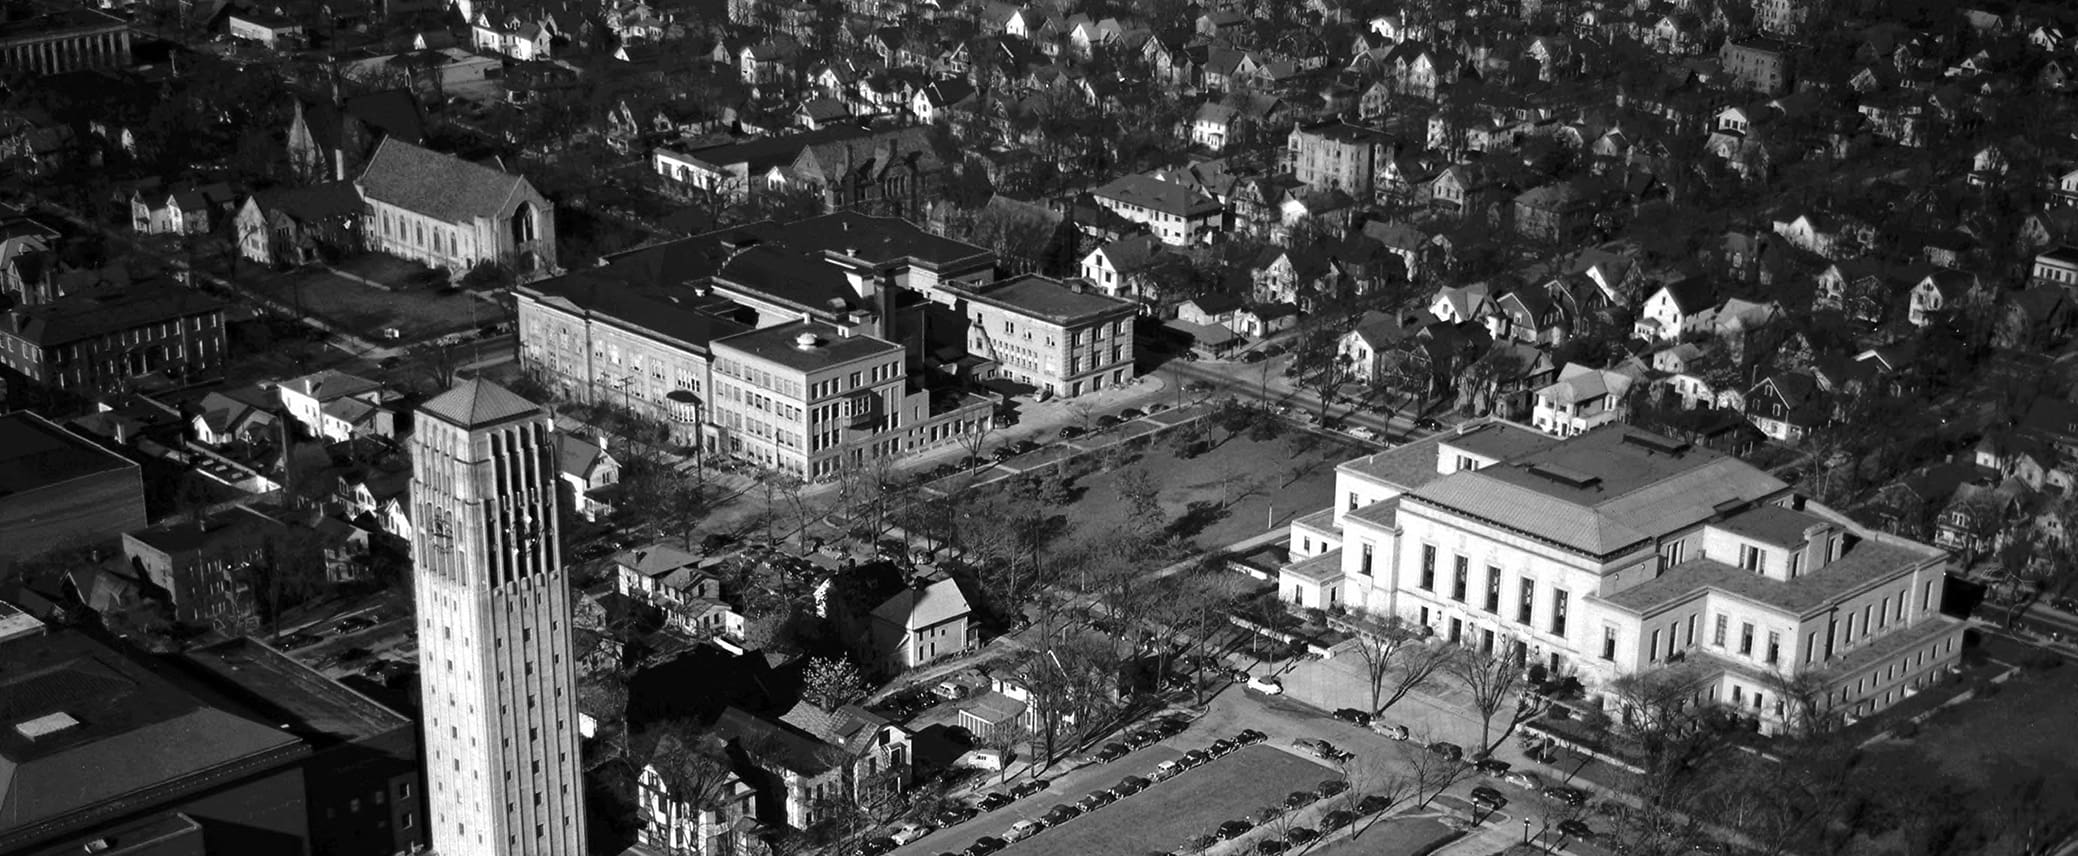 Aerial view of the Ann Arbor central campus, showing the Bell Tower, the Michigan League, and the Rackham Building.